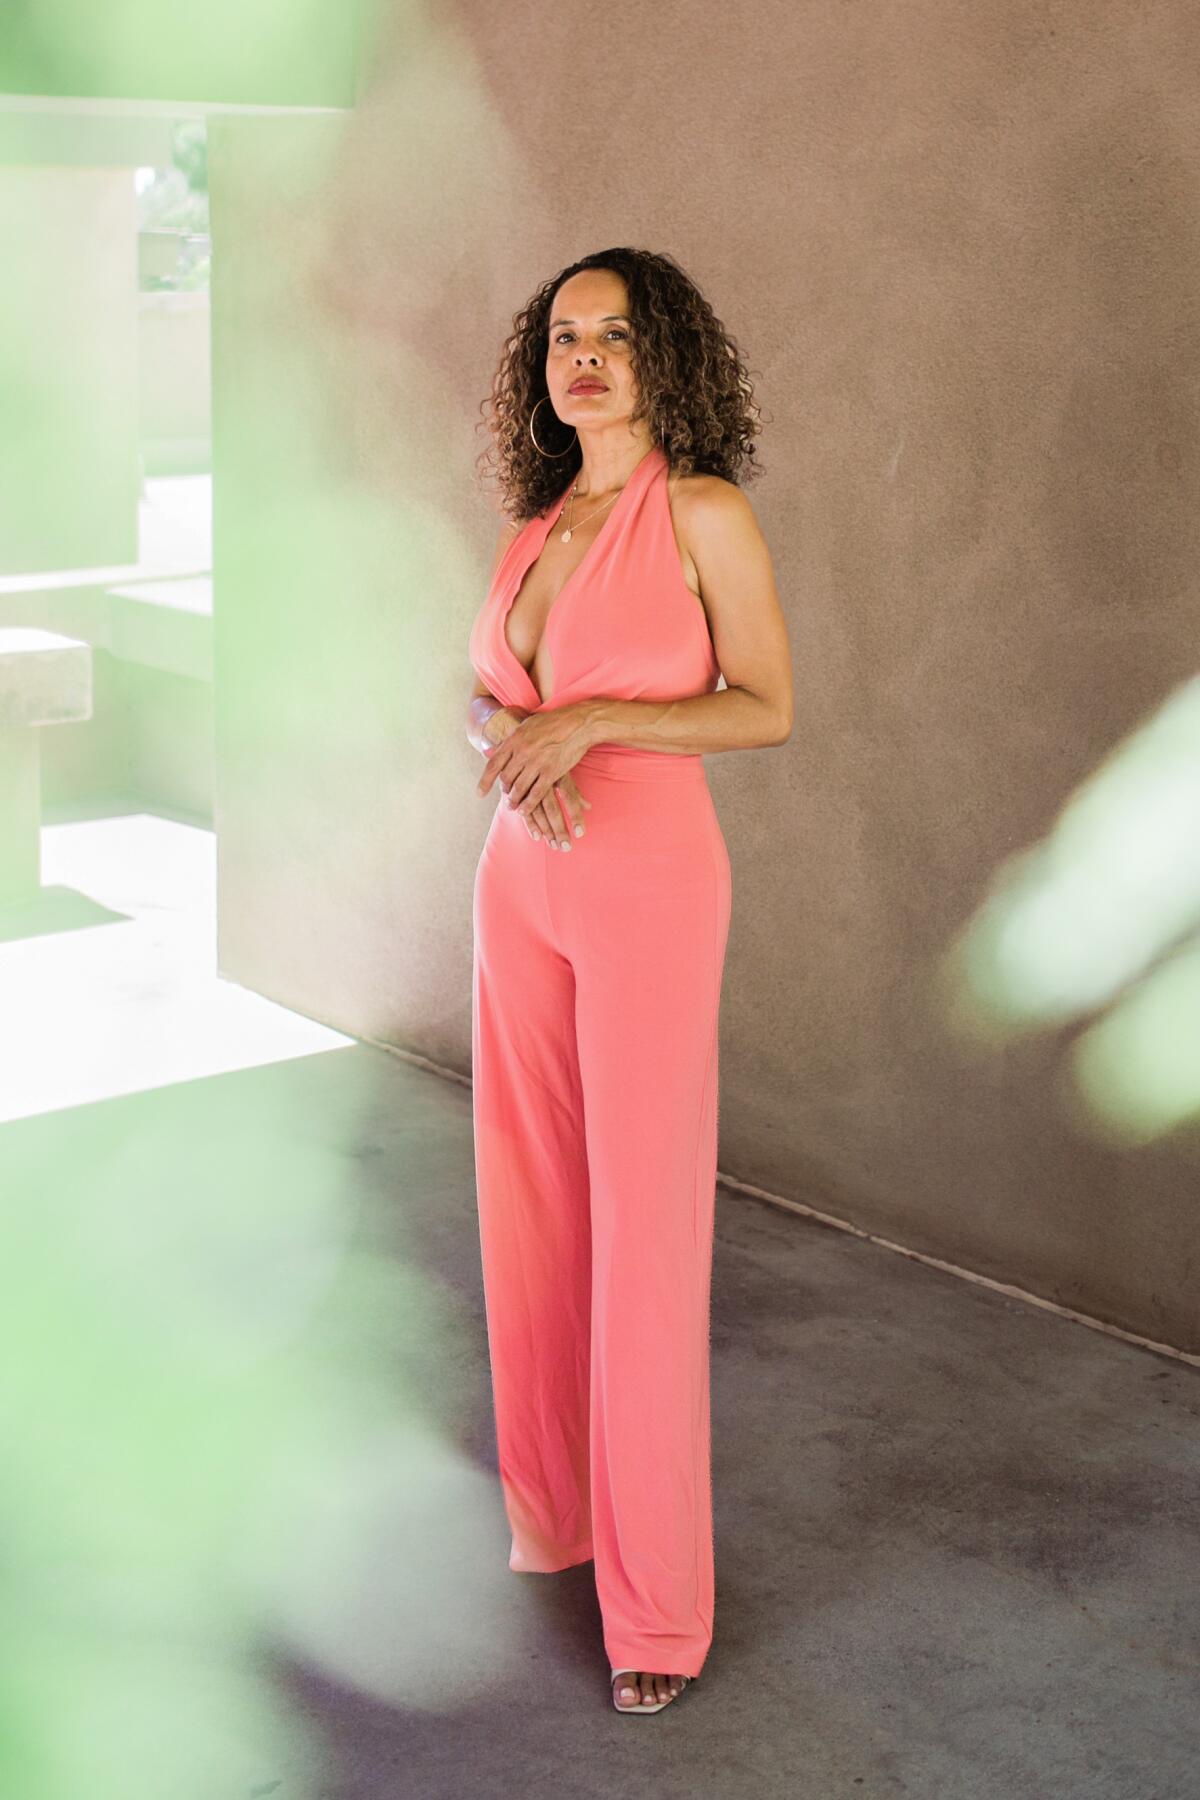 A full-length photo of a woman wearing a salmon-colored sleeveless jumpsuit.